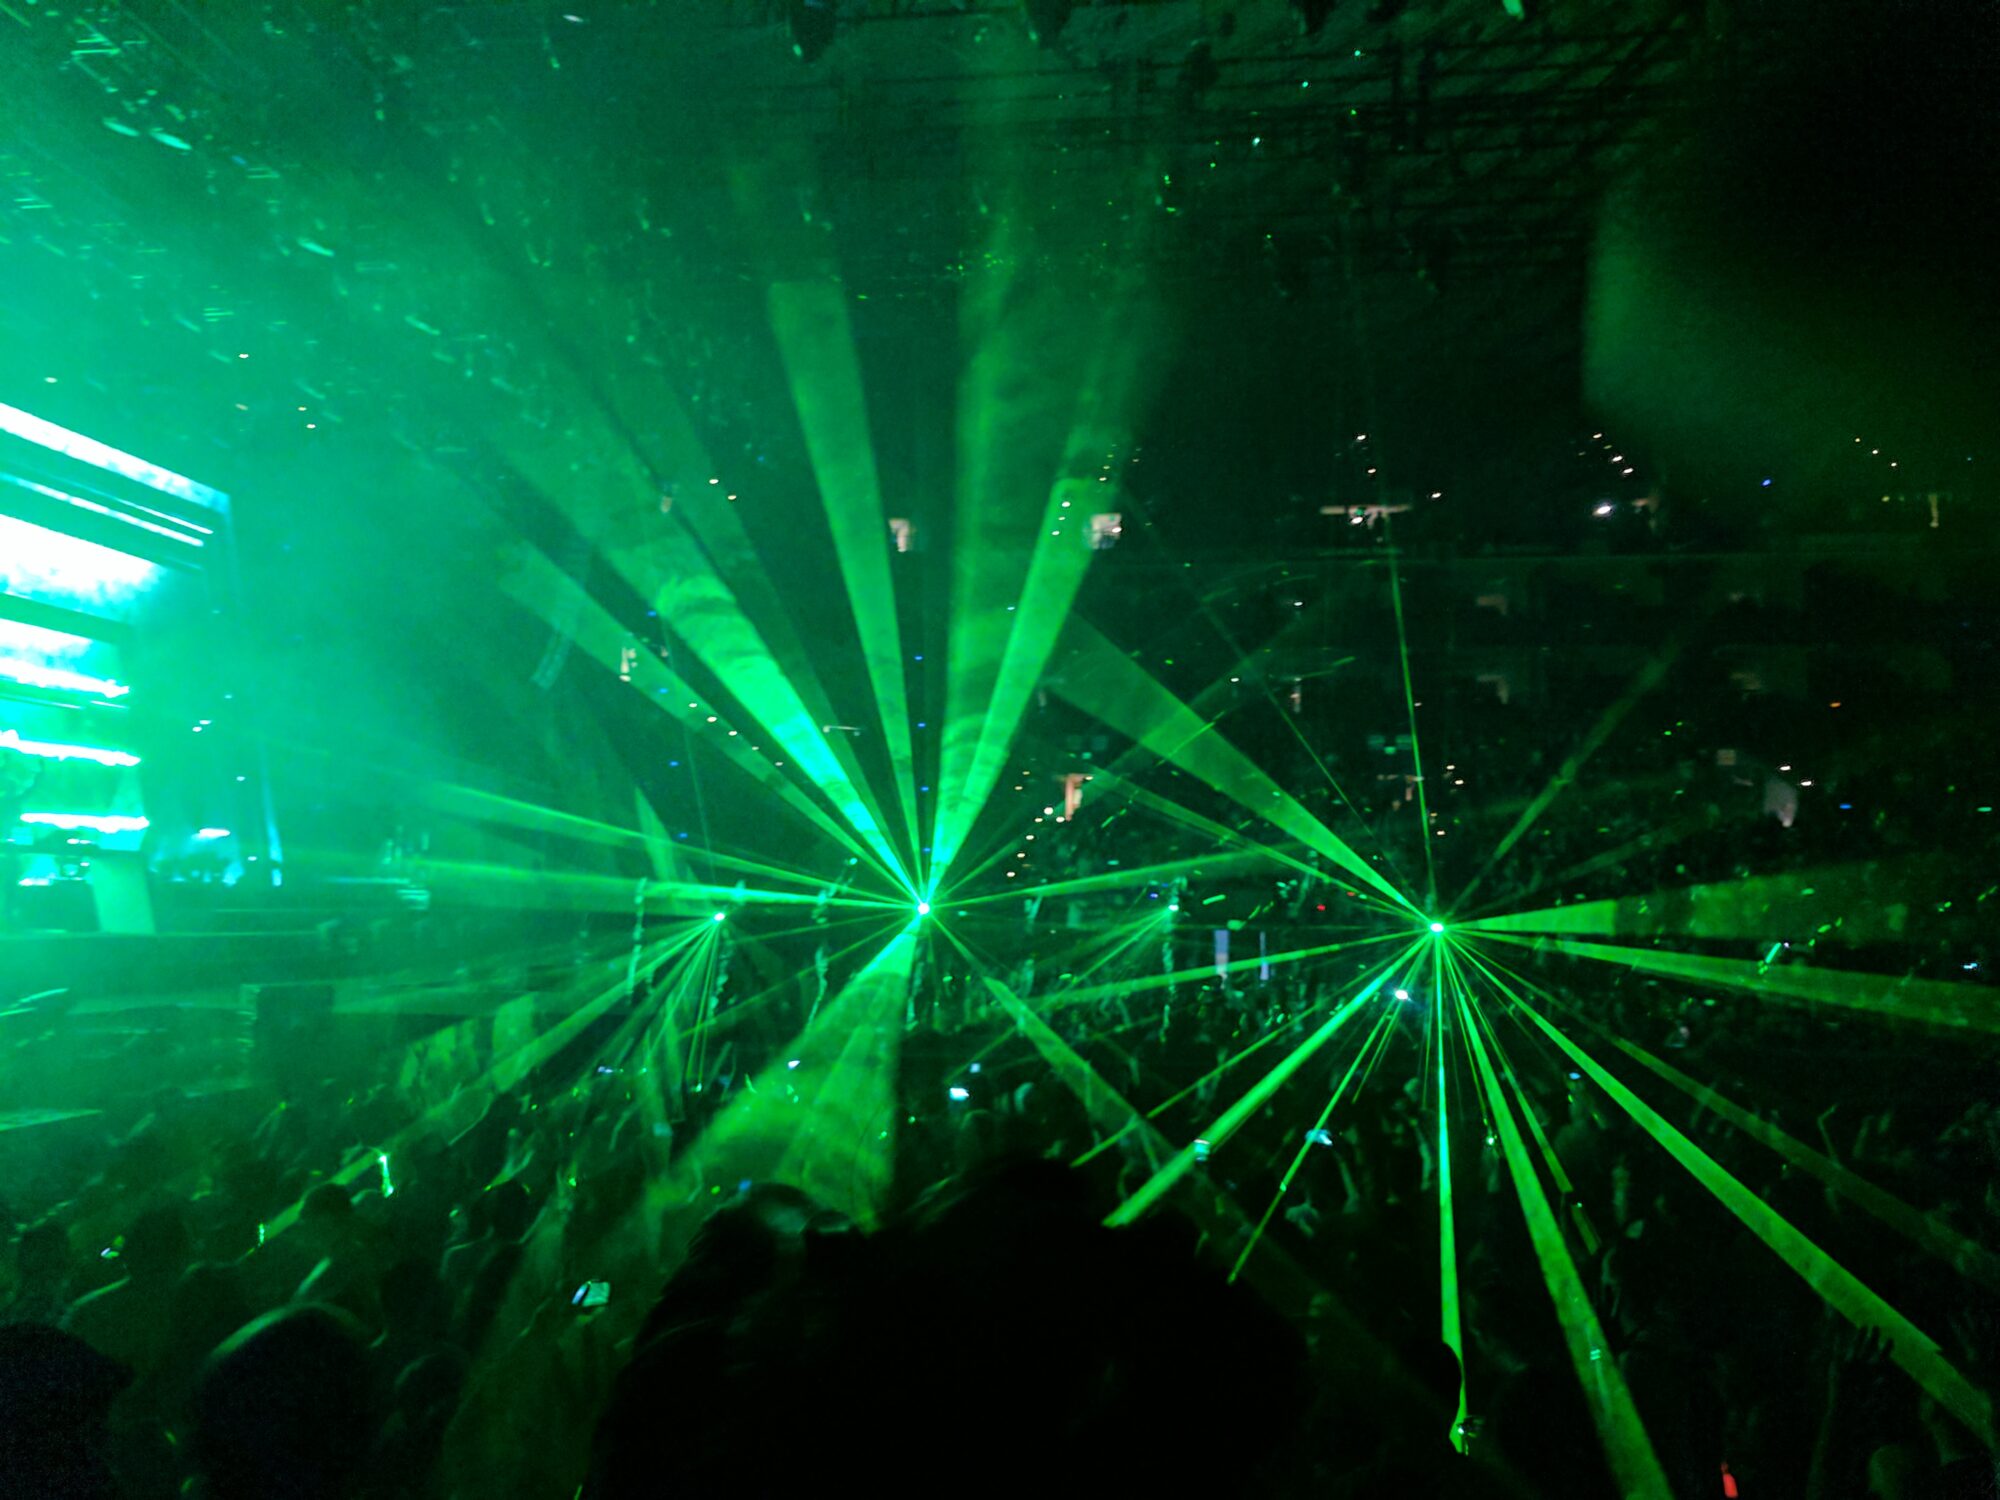 A laser show with green lasers over a sizable crowd.